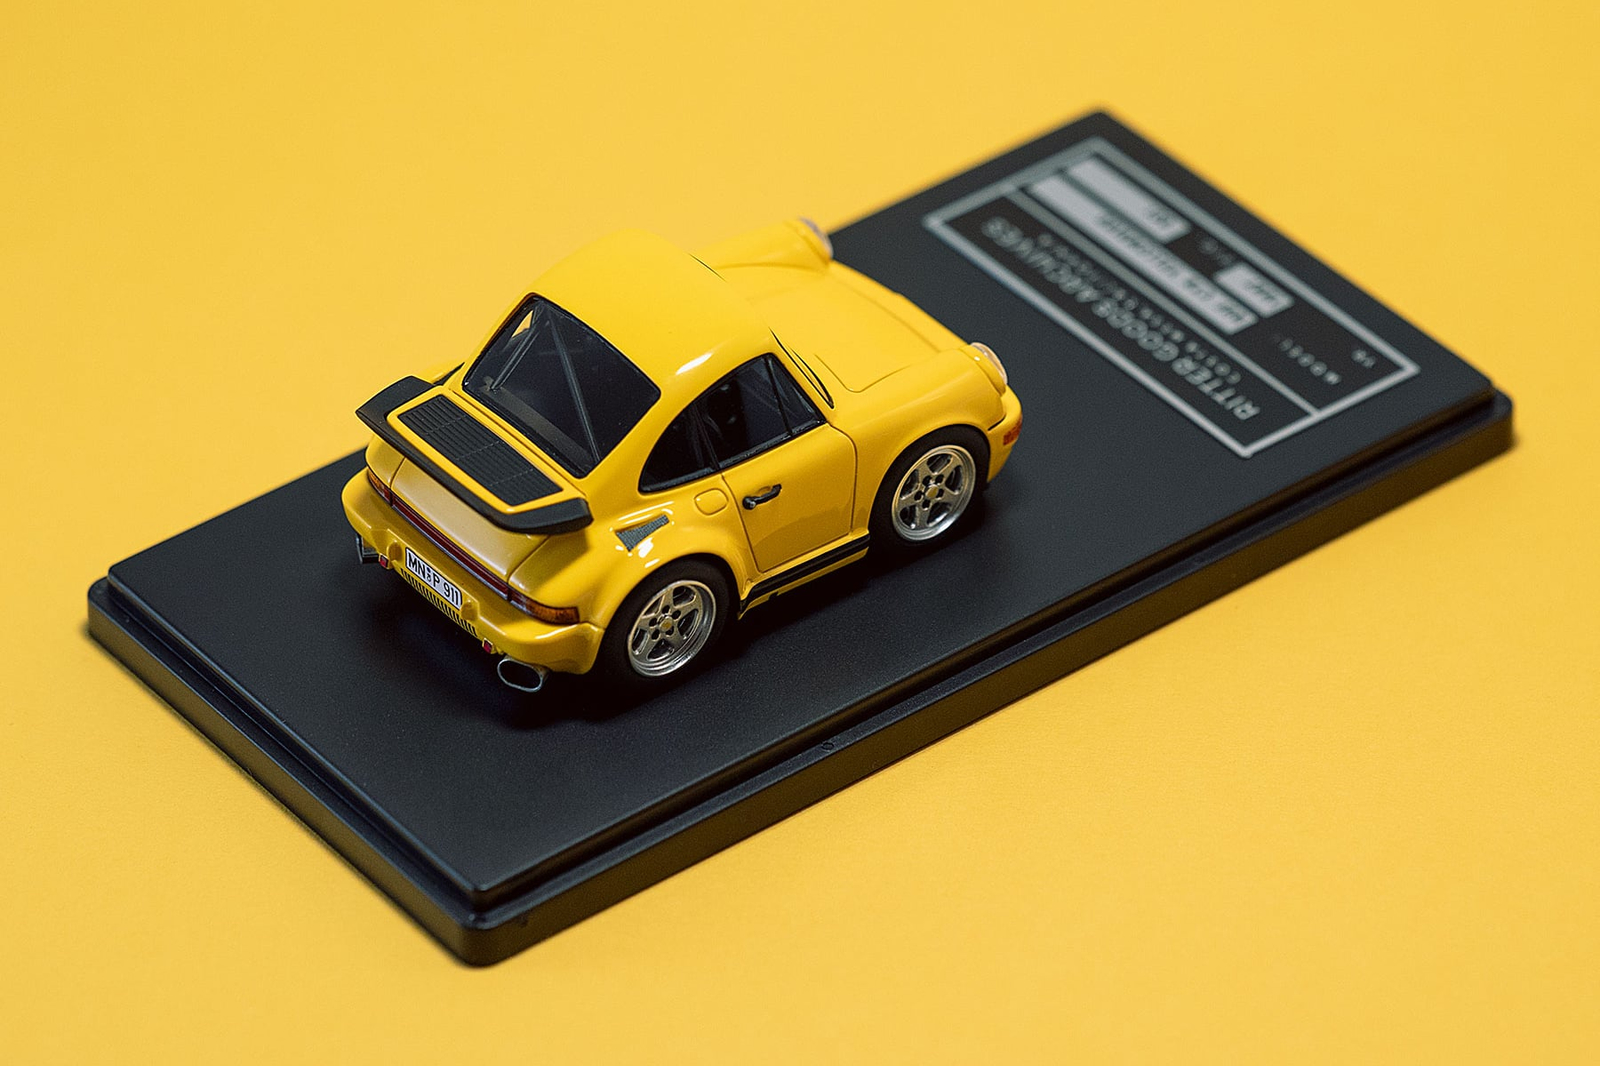 video, sports cars, offbeat, tiny ruf ctr yellowbird collectible is a great way to spend $125